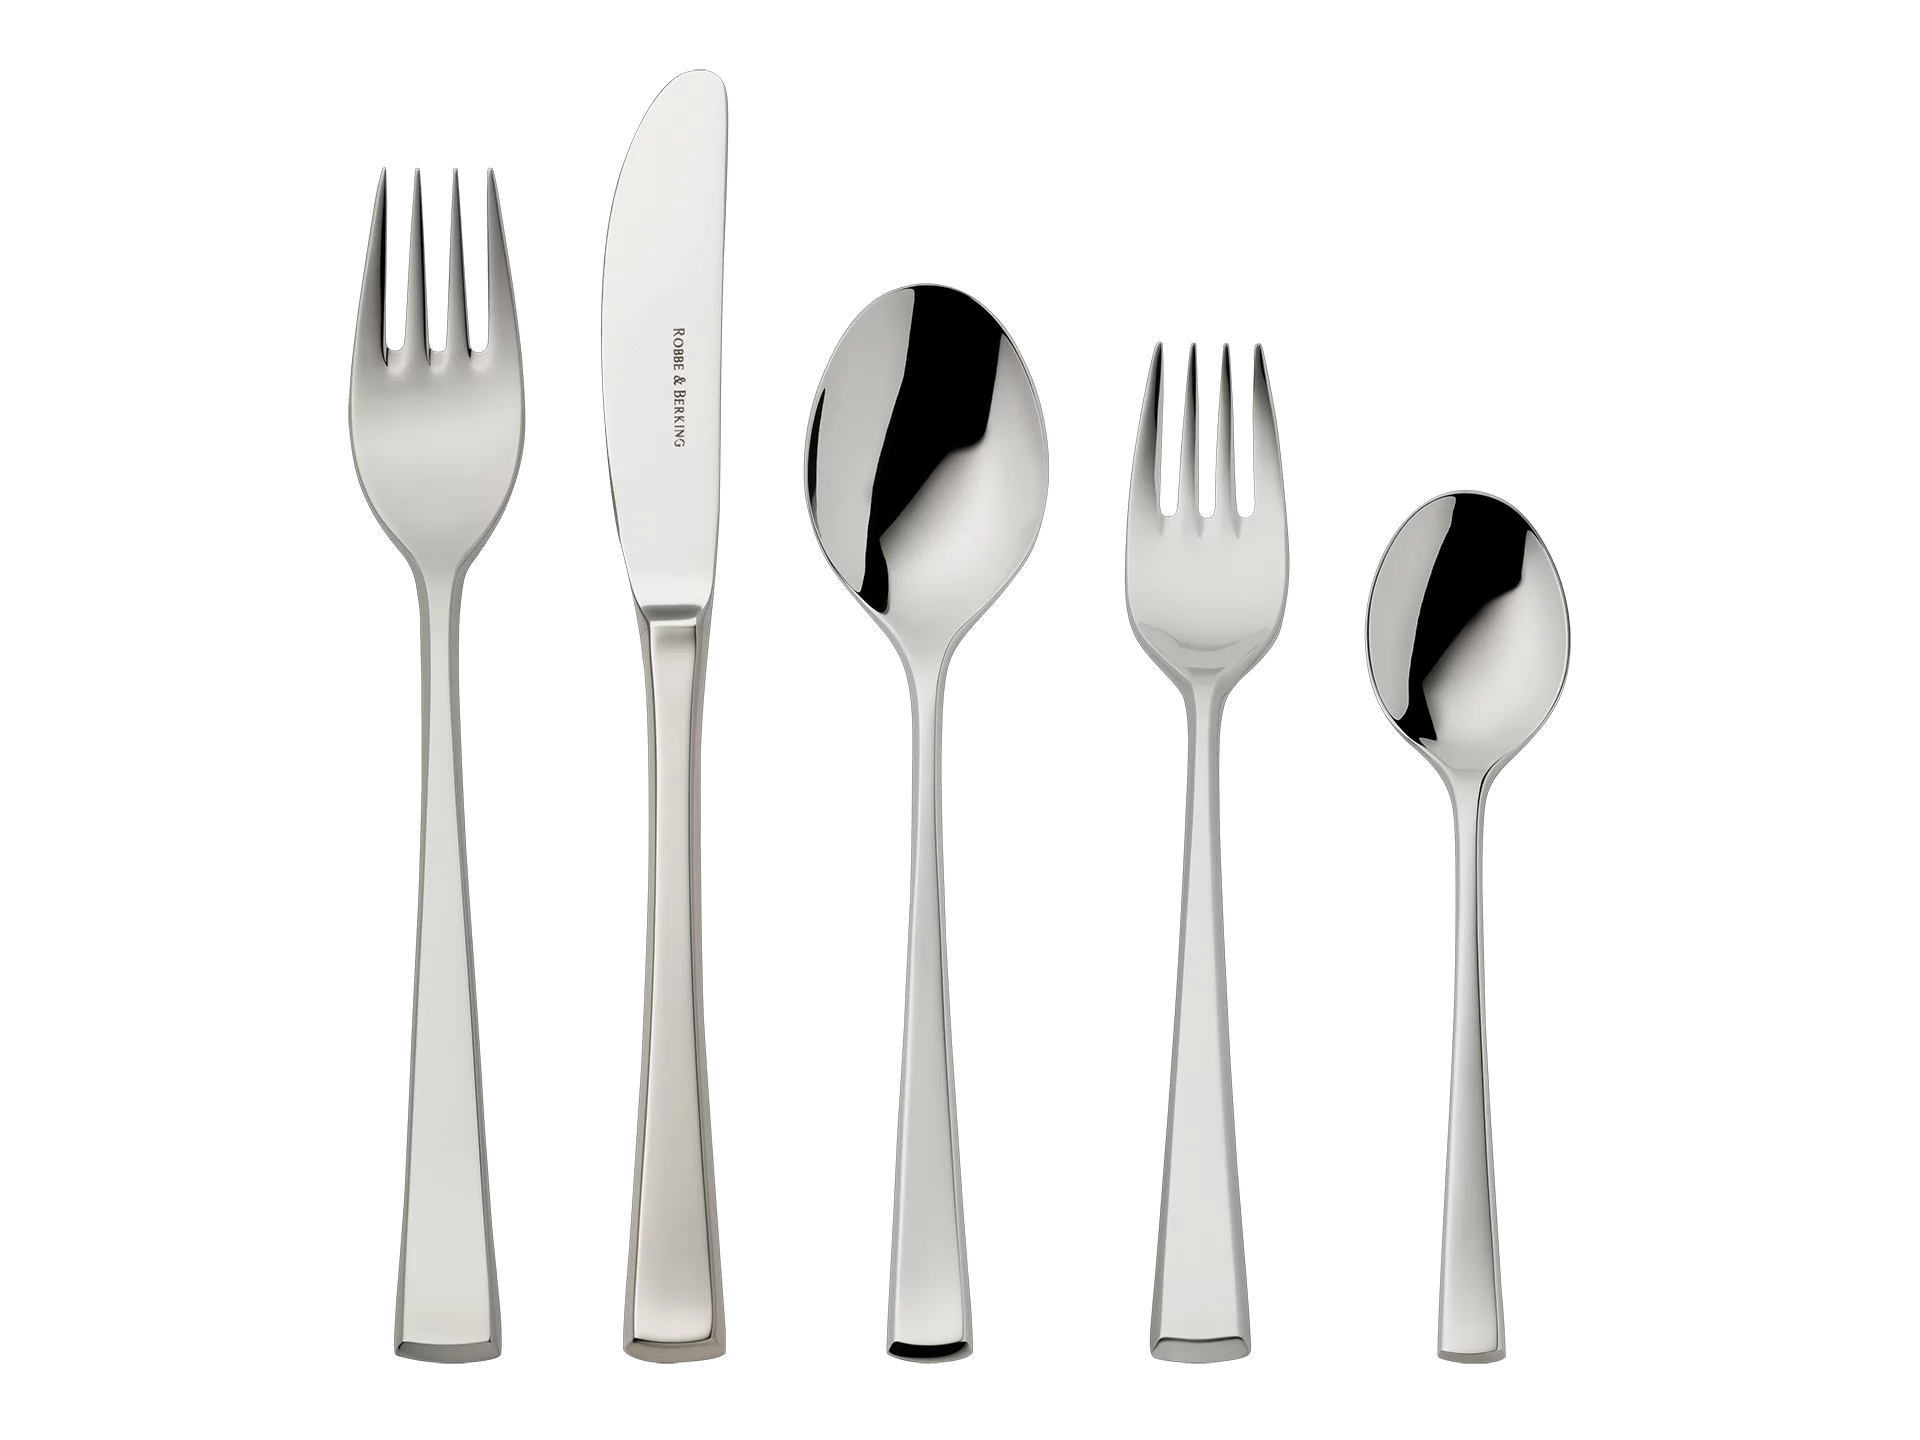 York 5-piece place setting (18/8 stainless steel)